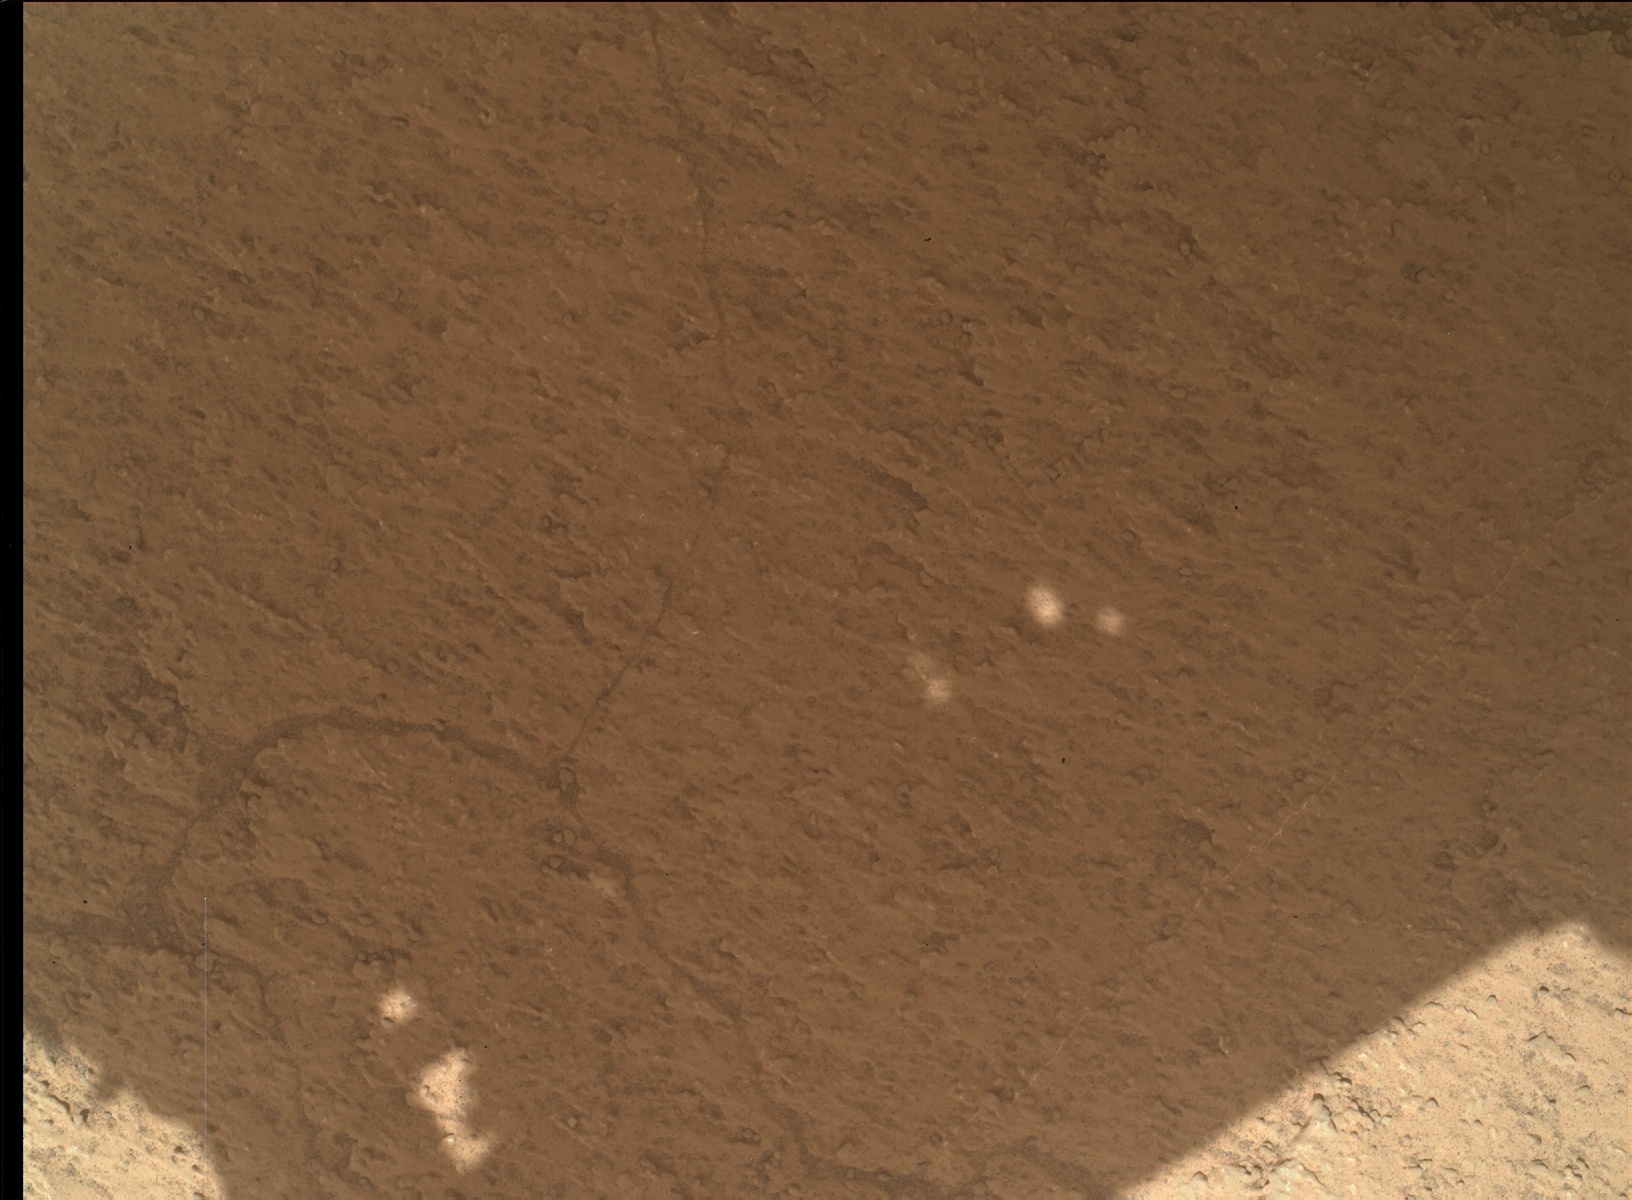 Nasa's Mars rover Curiosity acquired this image using its Mars Hand Lens Imager (MAHLI) on Sol 3229